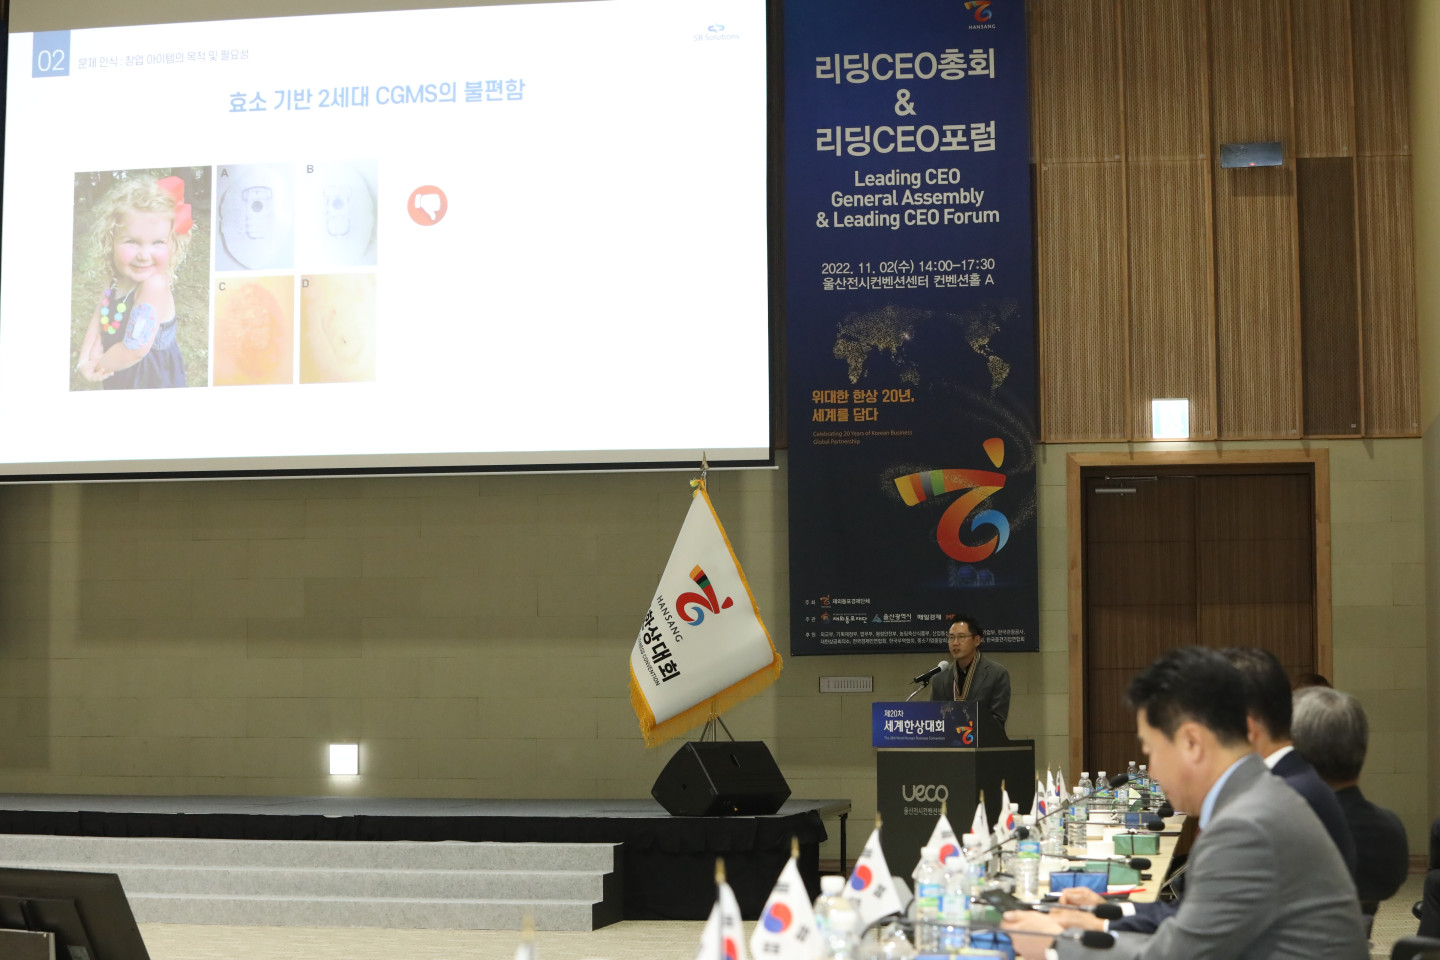 A presenter making a speech on the future industries at the leading CEOs’ general meeting and forum